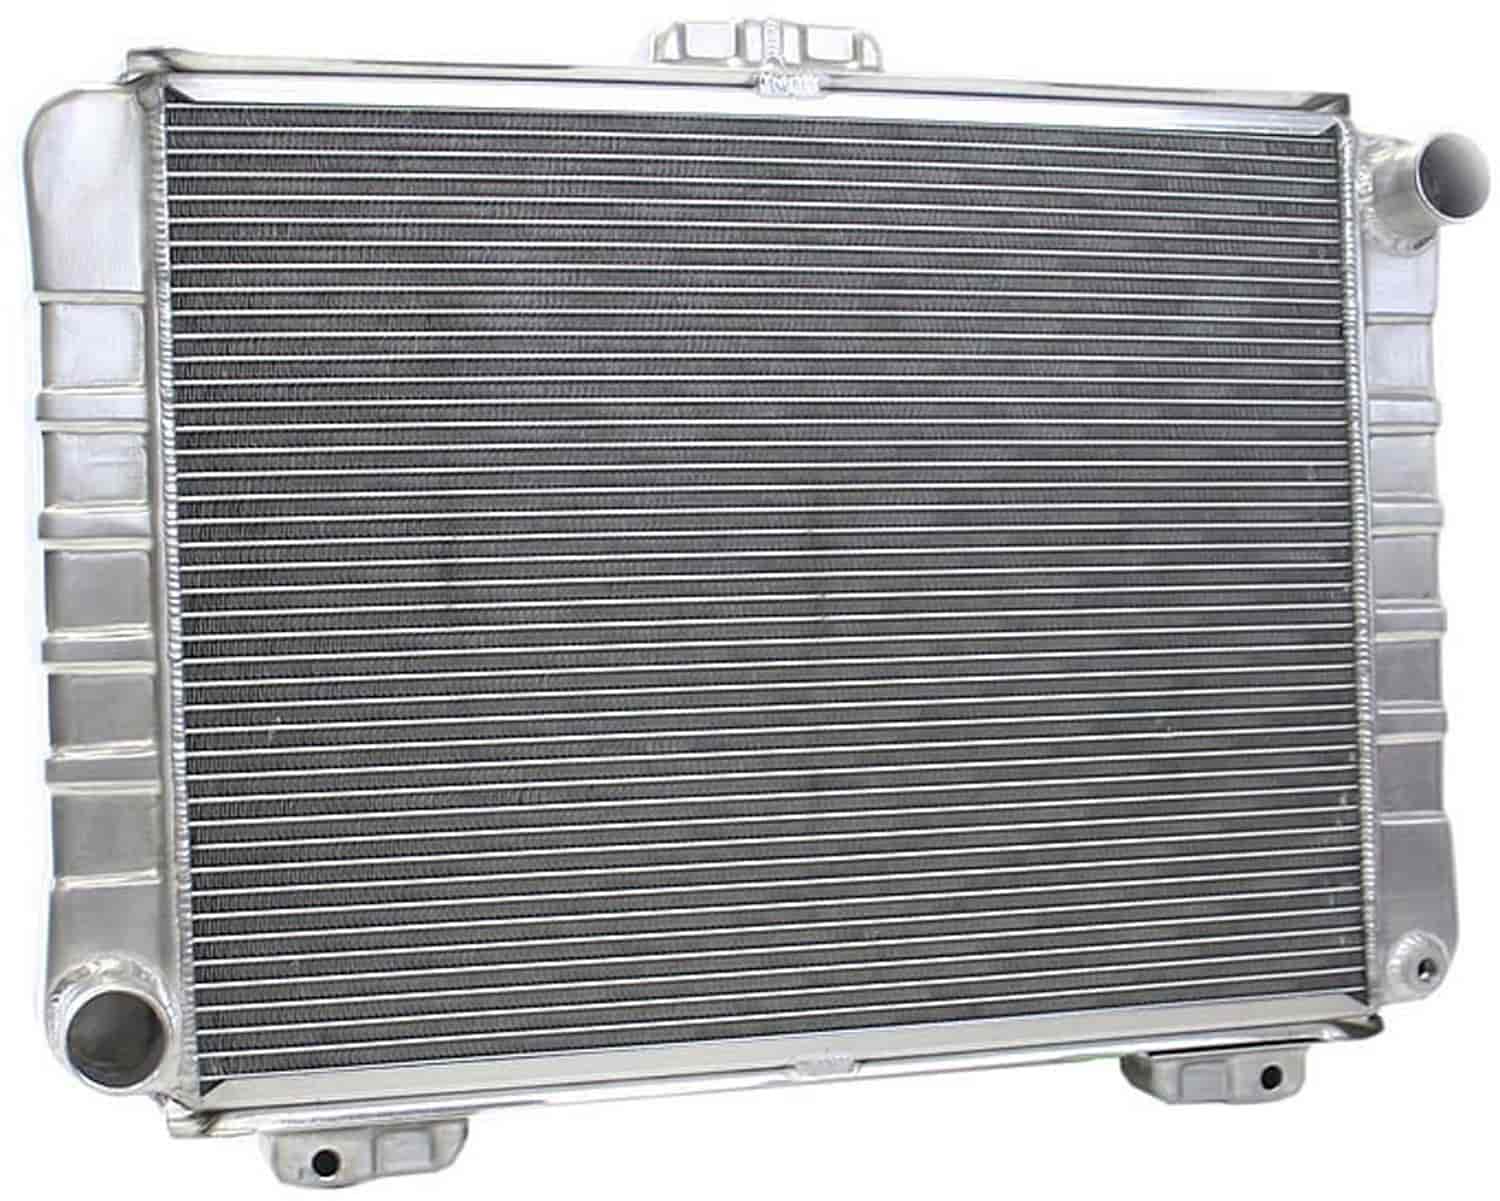 ExactFit Radiator for 1964 Galaxie/Thunderbolt with Late Small Block & Big Block